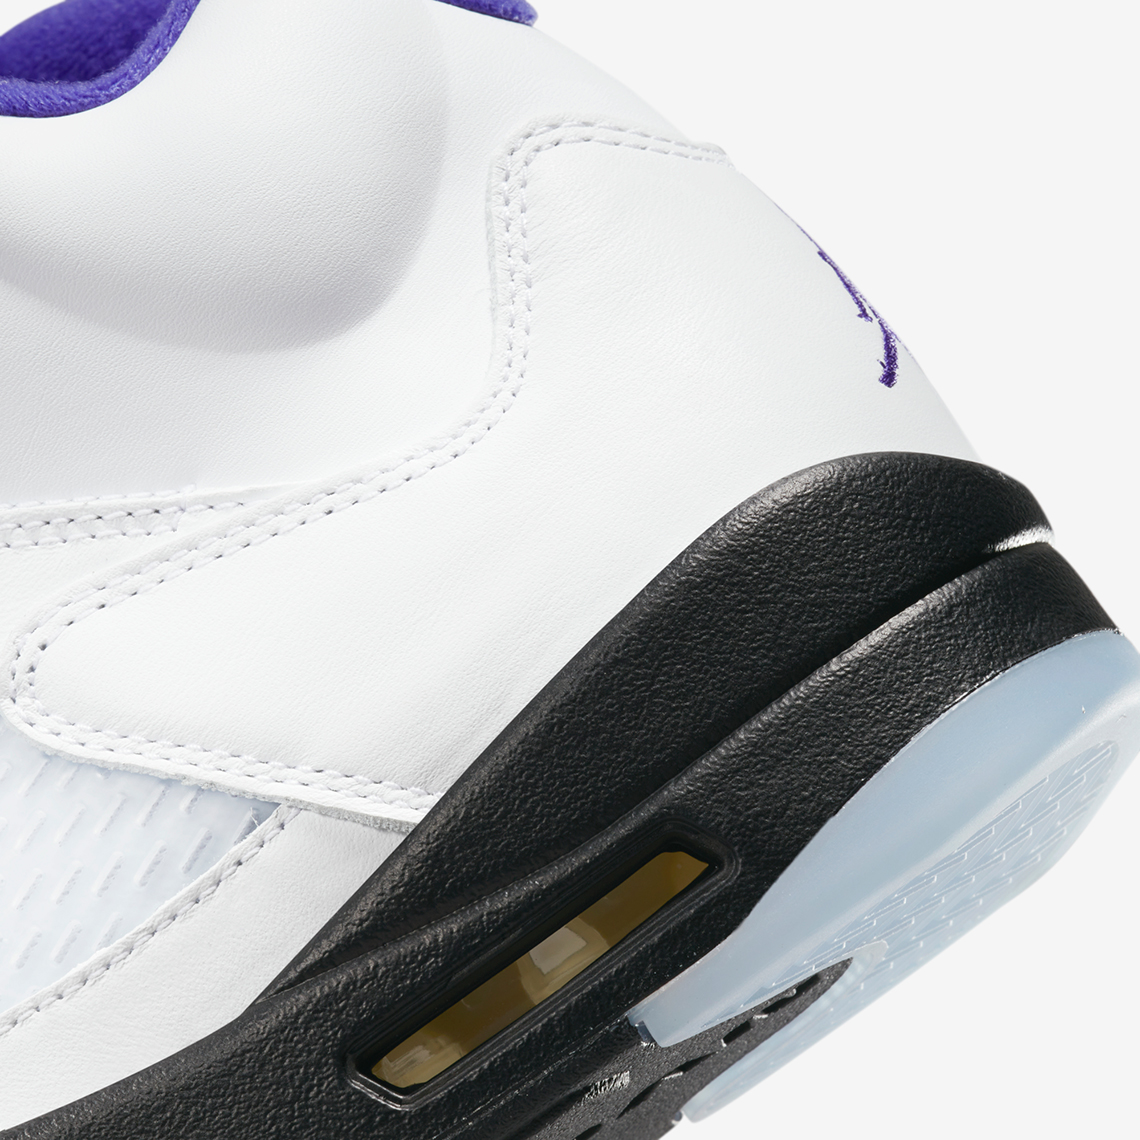 The Nike This year certainly hasnt been short of Jordan 5 colourways is currently only listed in the Concord Dd0587 141 2